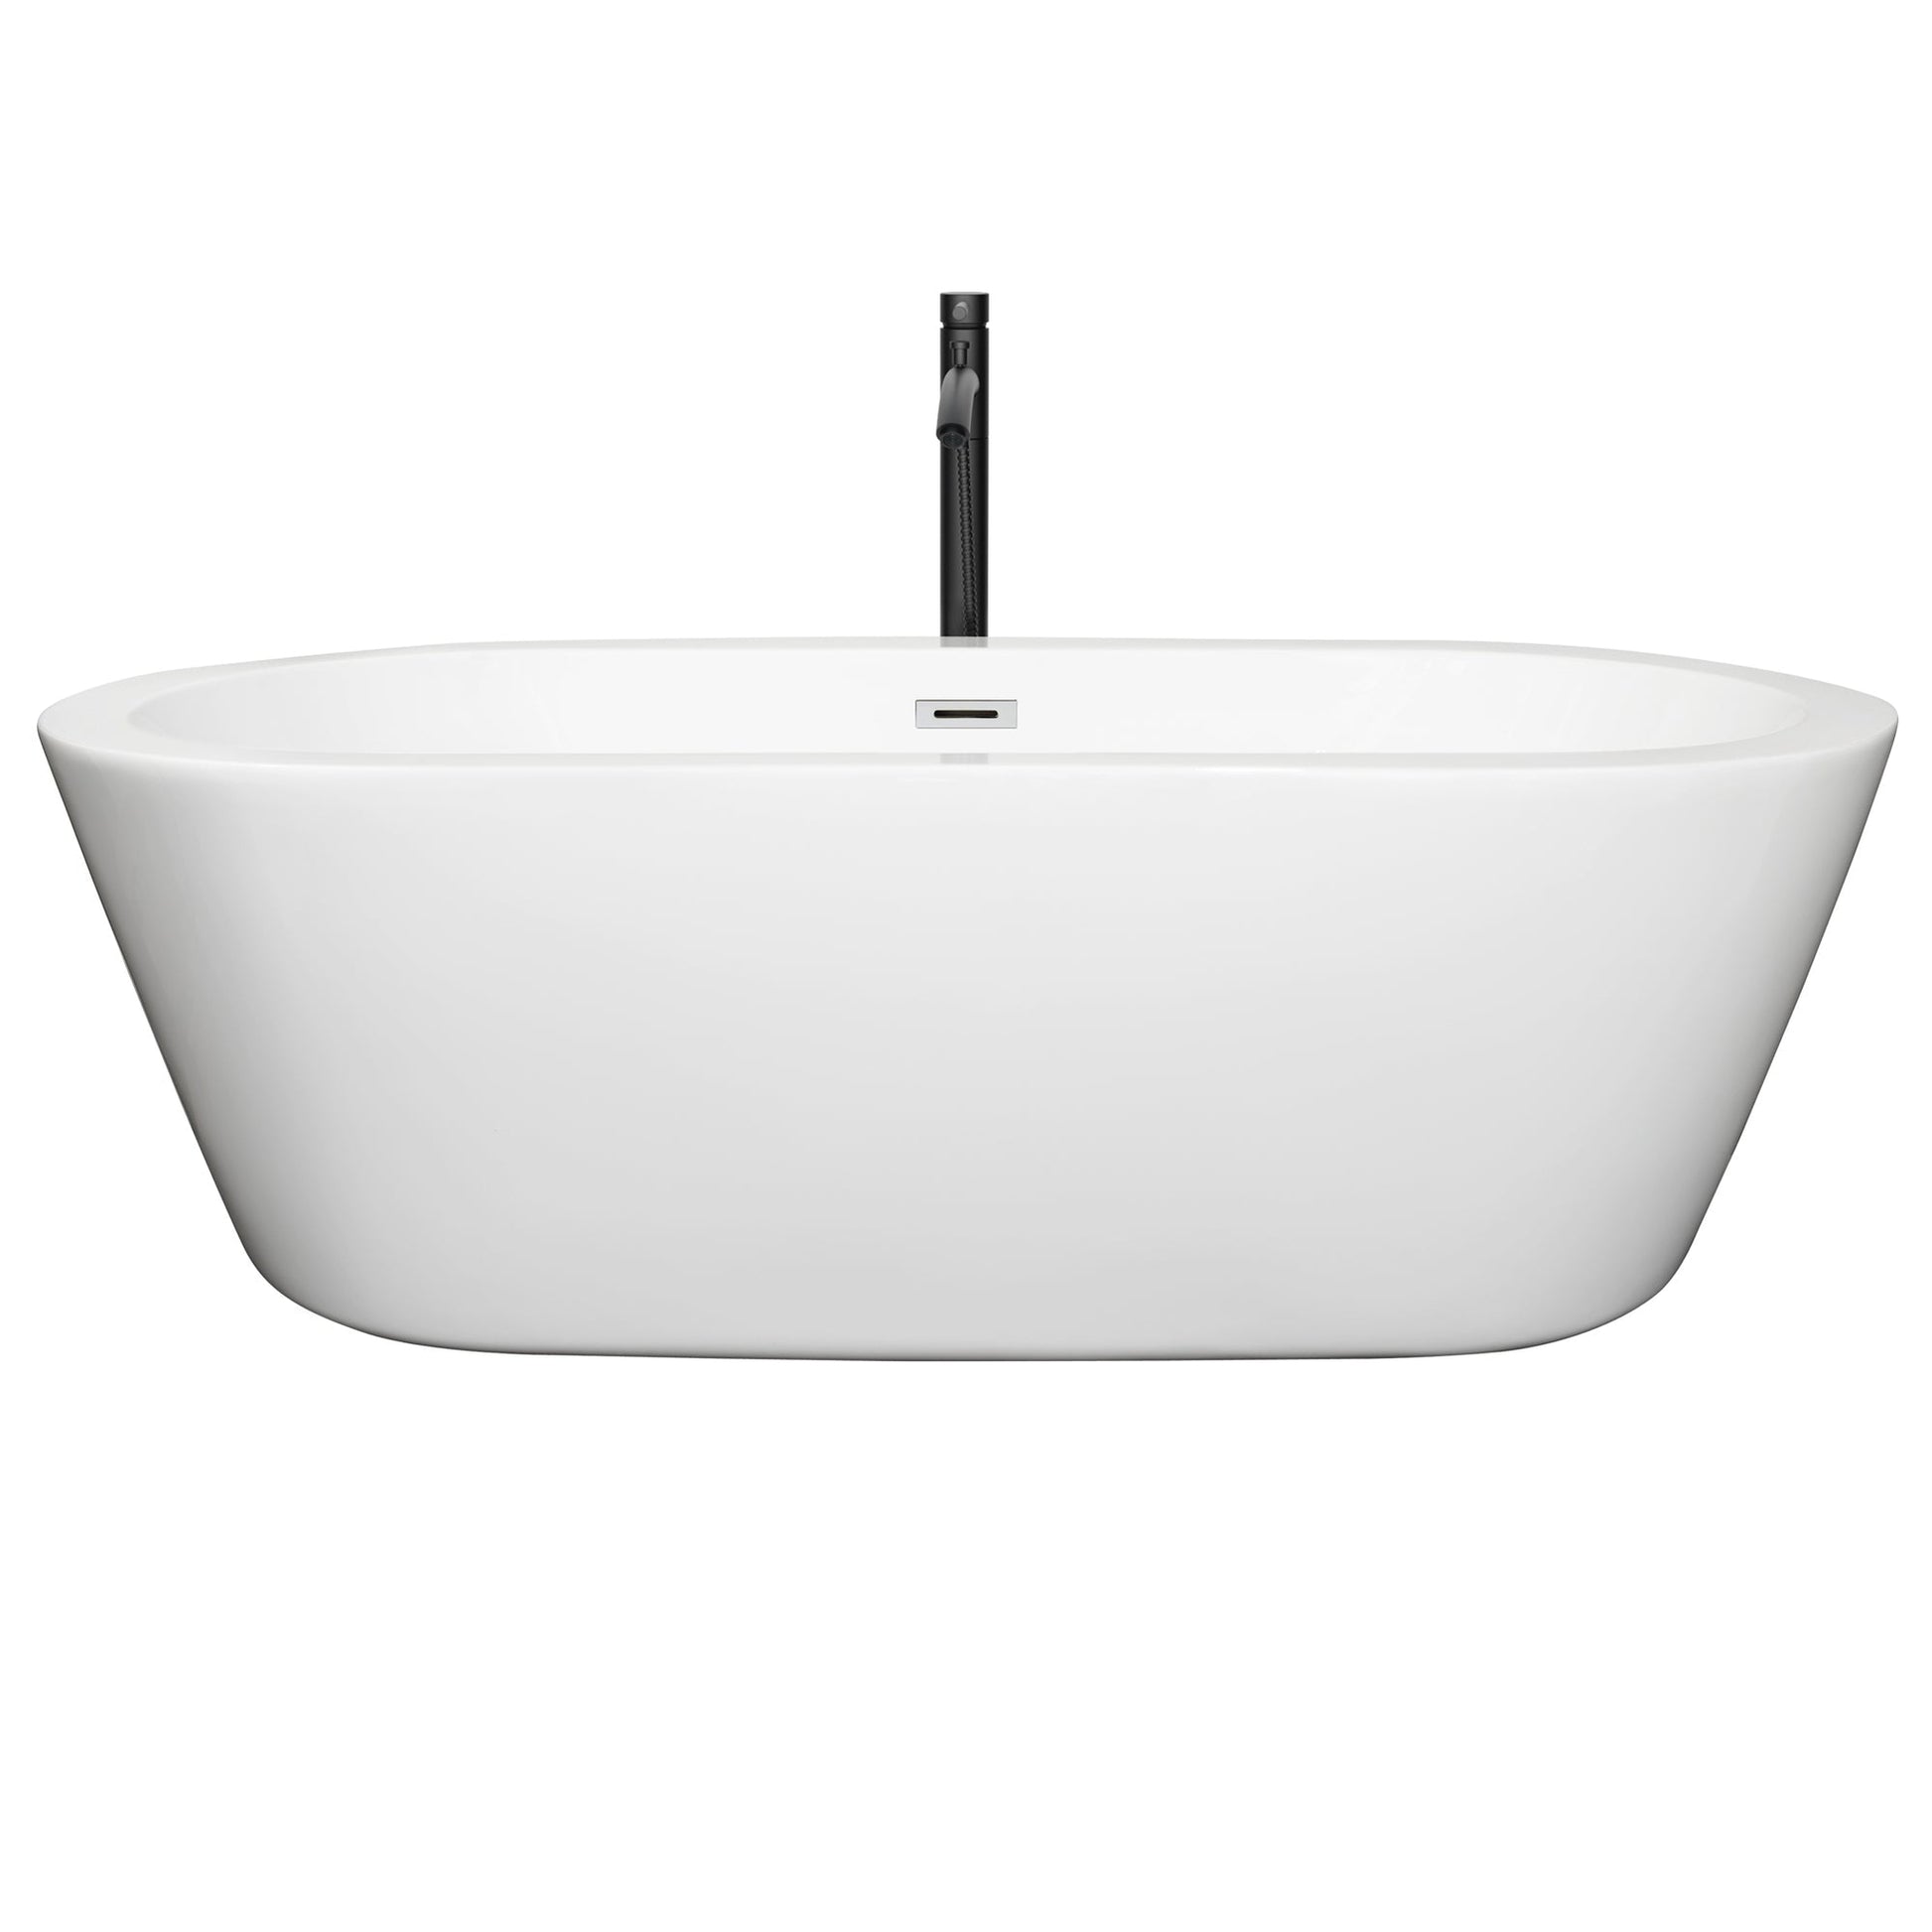 Wyndham Collection Mermaid 71" Freestanding Bathtub in White With Polished Chrome Trim and Floor Mounted Faucet in Matte Black